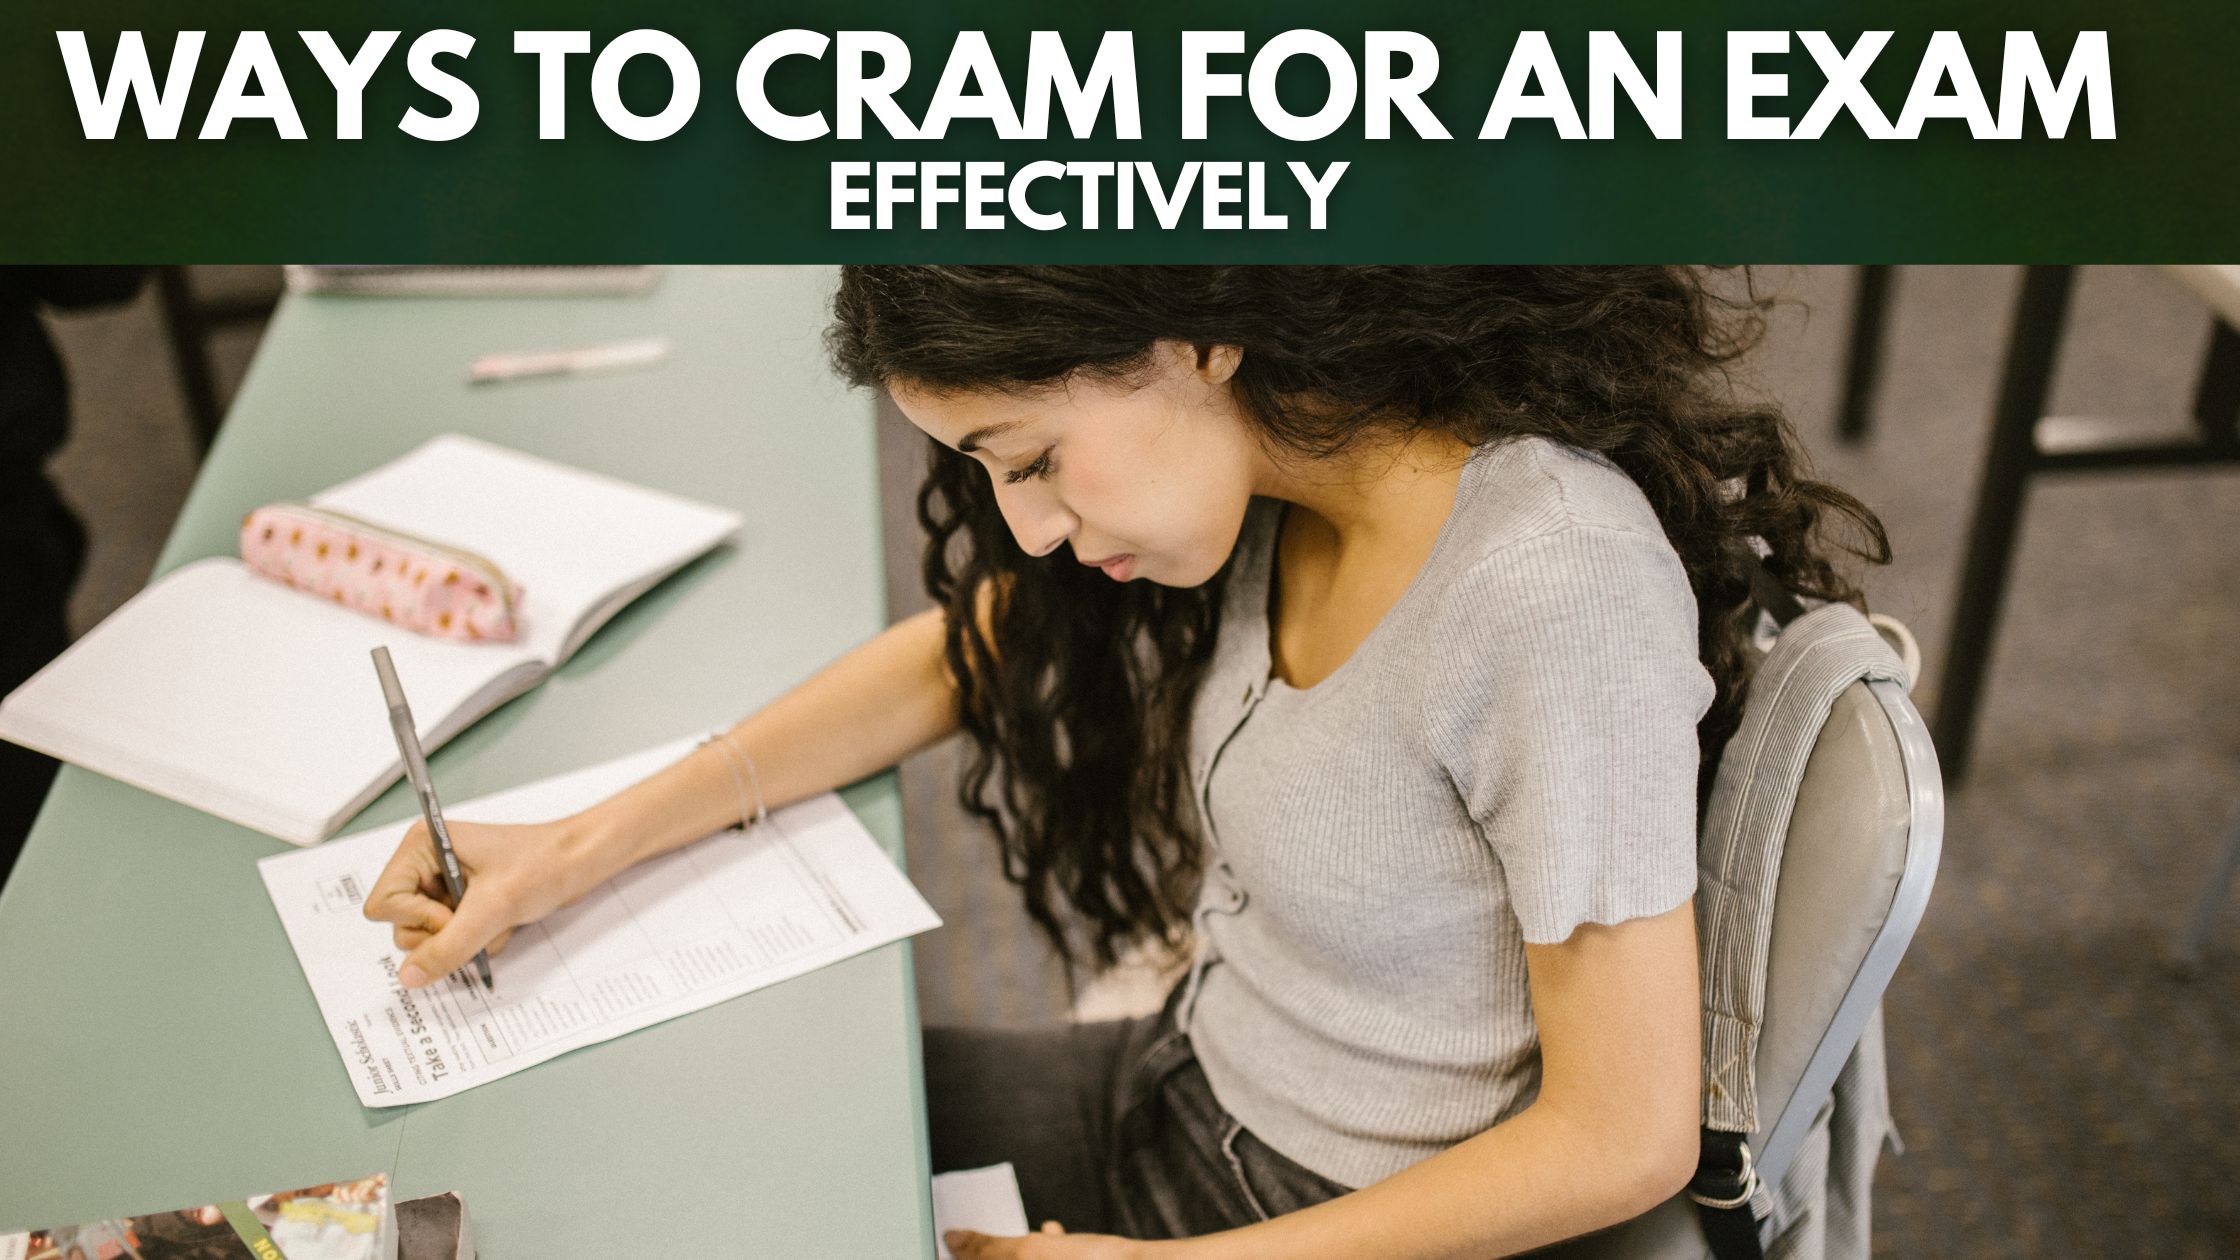 Ways to Cram for an Exam Effectively